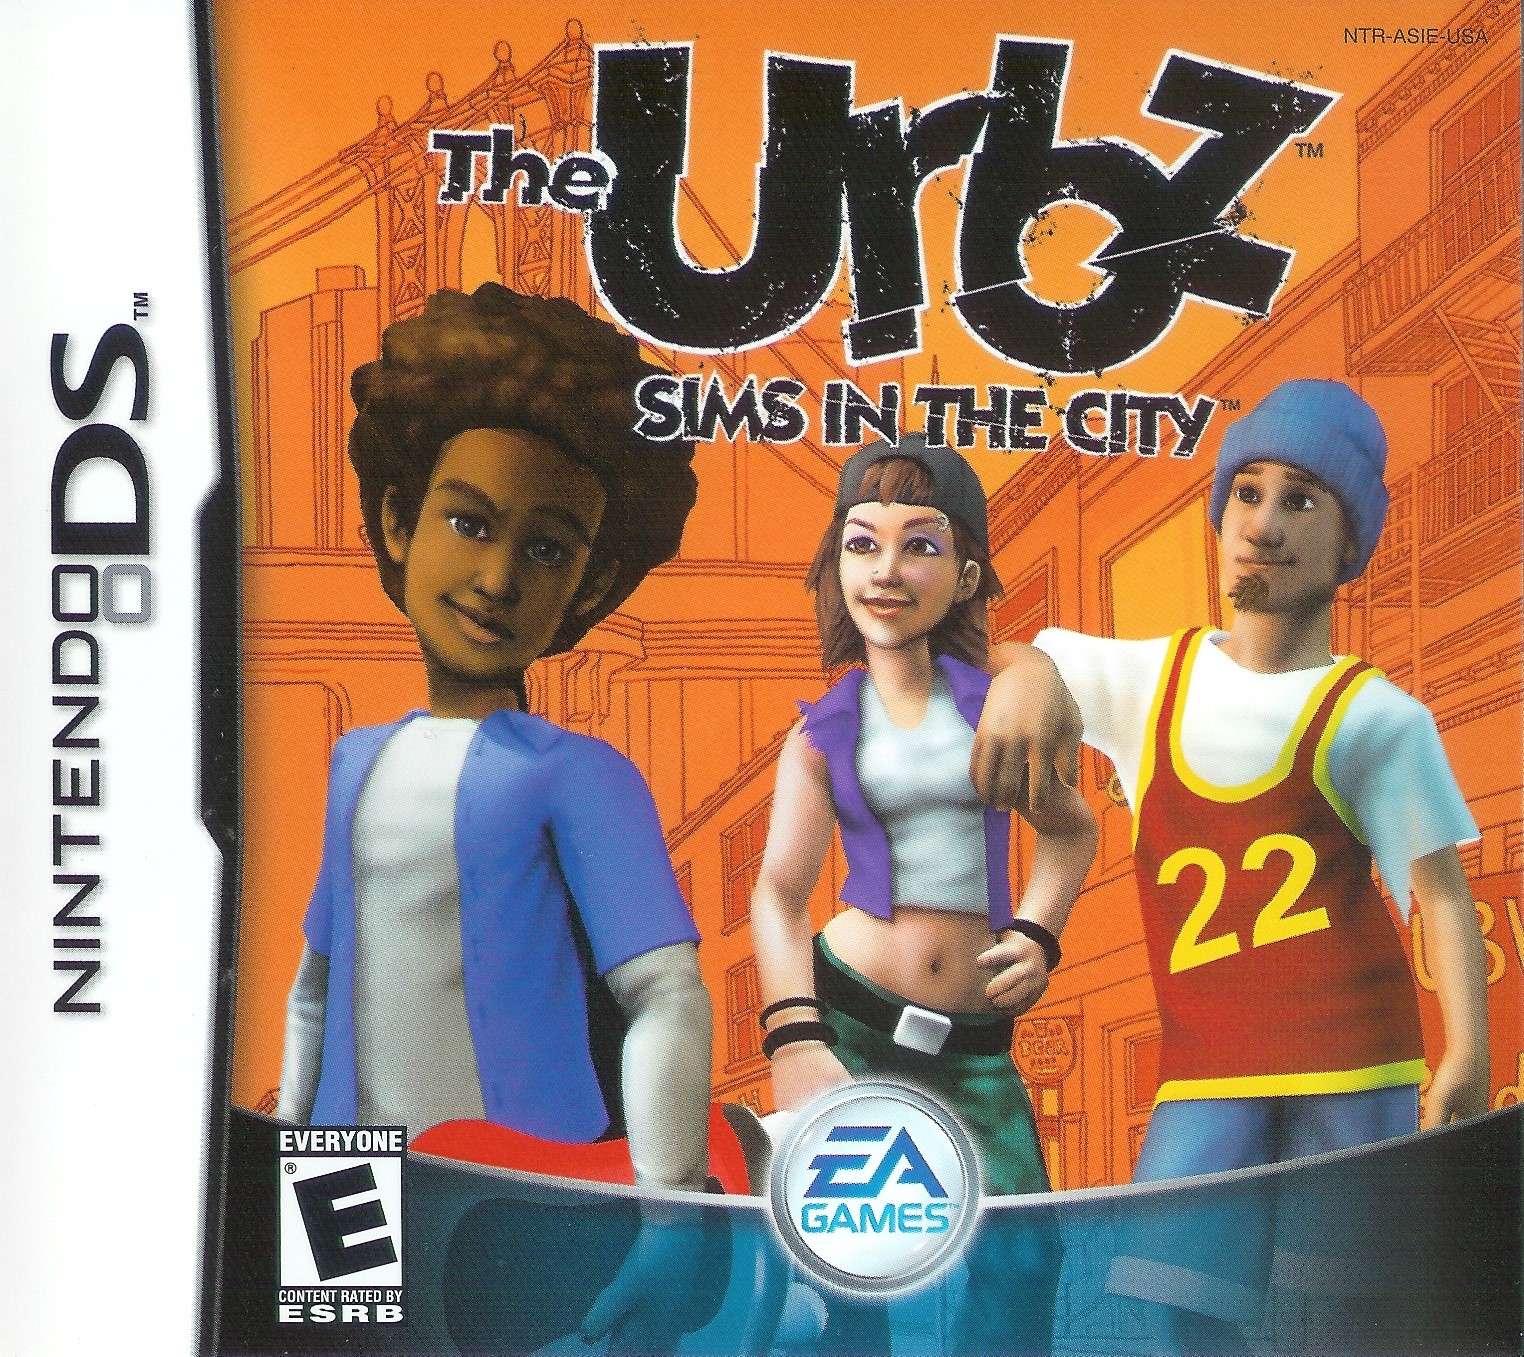 'The Urbz: Sims in the City'